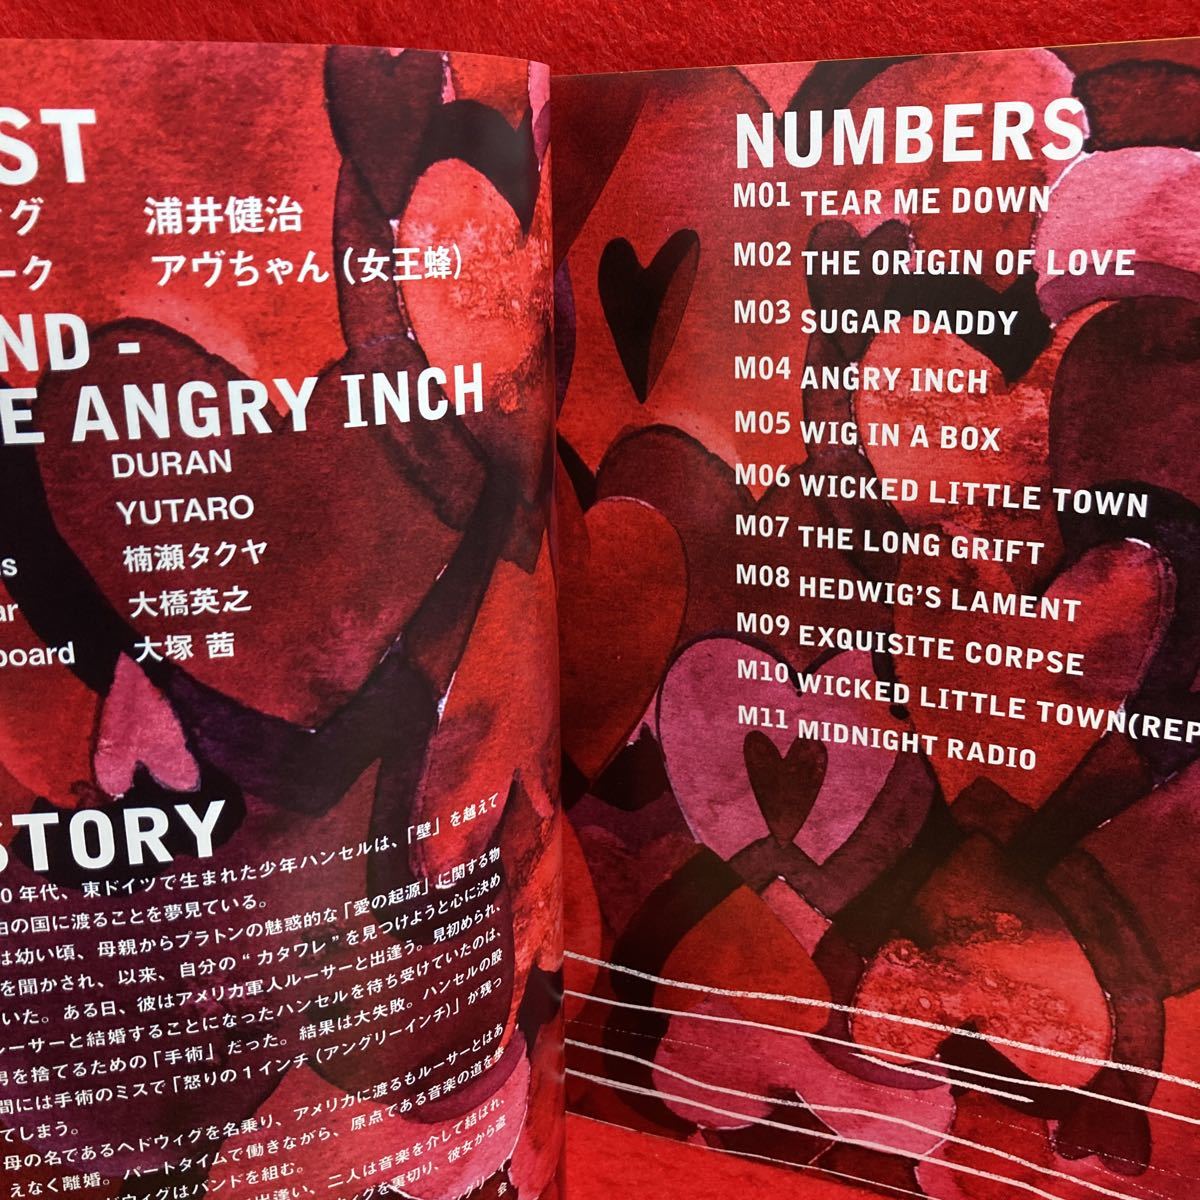 ▼HEDWIG AND THE ANGRY INCH 2019 MUSICALミュージカル パンフレット 浦井健治 女王蜂 アヴちゃん DURAN YUTARO 楠瀬タクヤ チラシ1枚付き_画像3